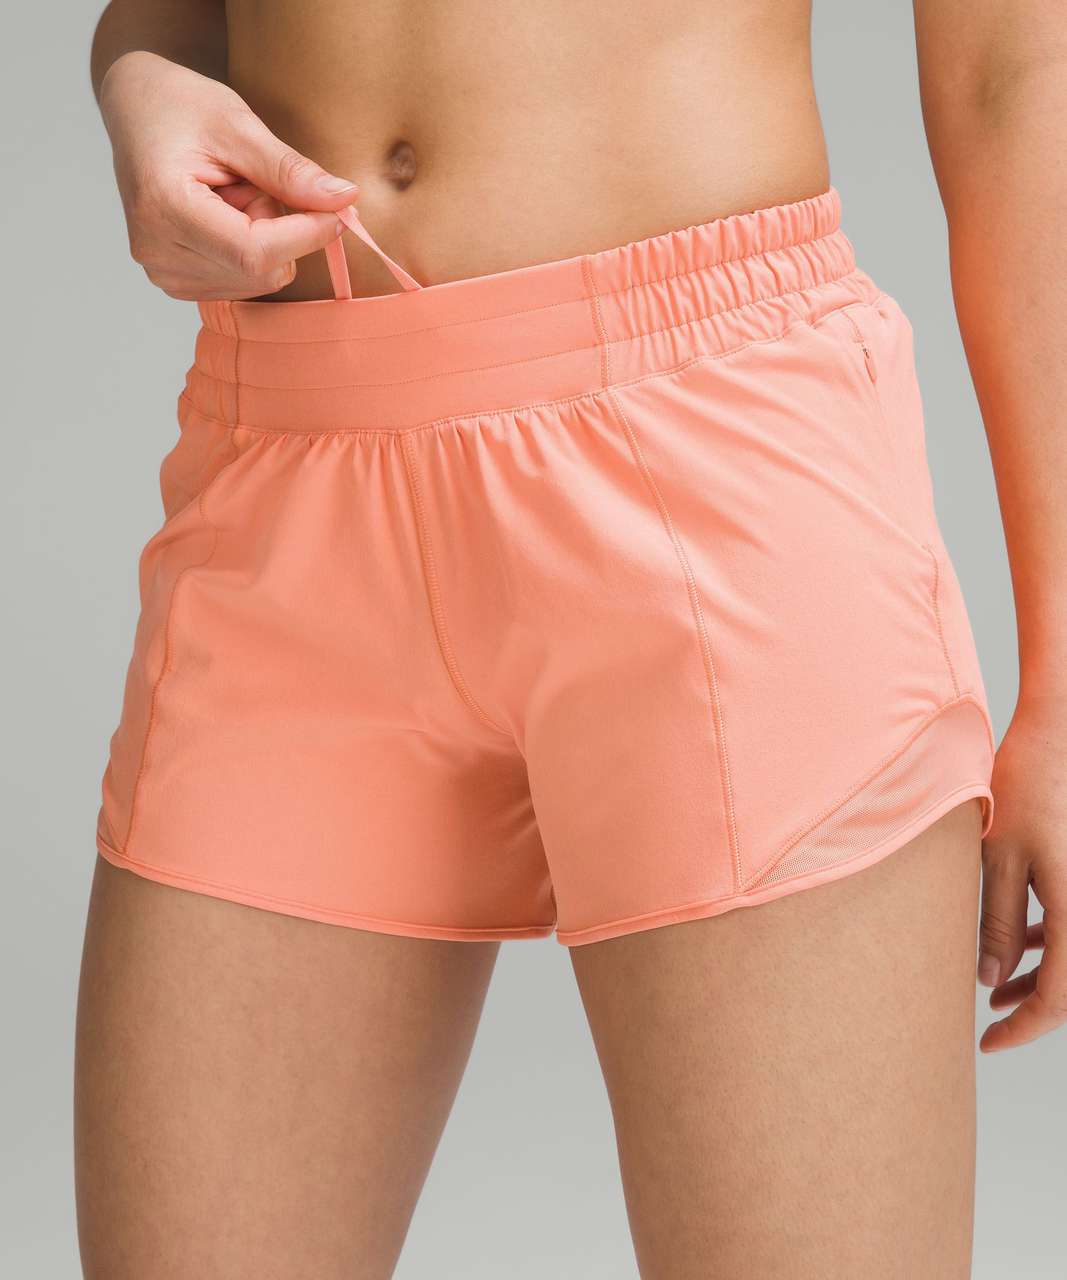 The Hot Coral Brief